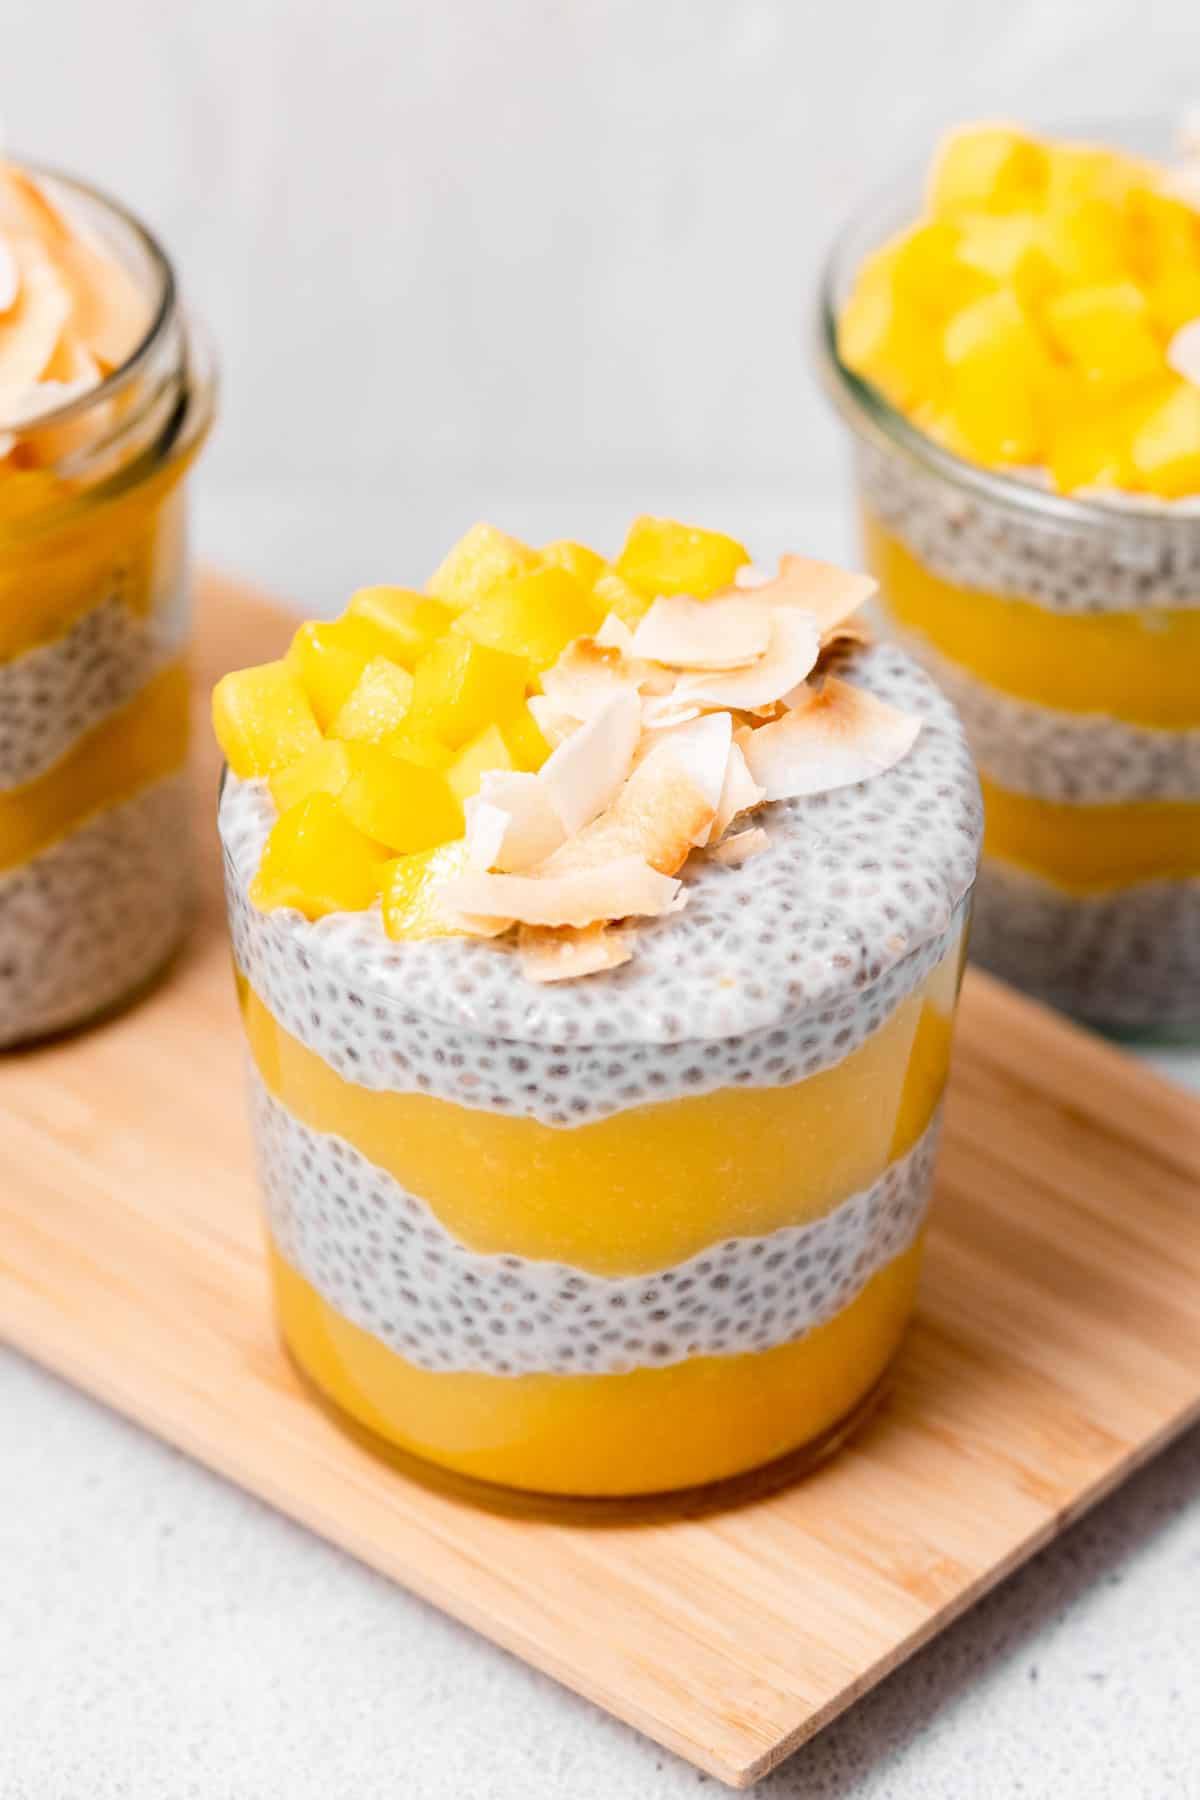 An angled view of a jar of mango chia pudding with shredded coconut and diced mango on top.